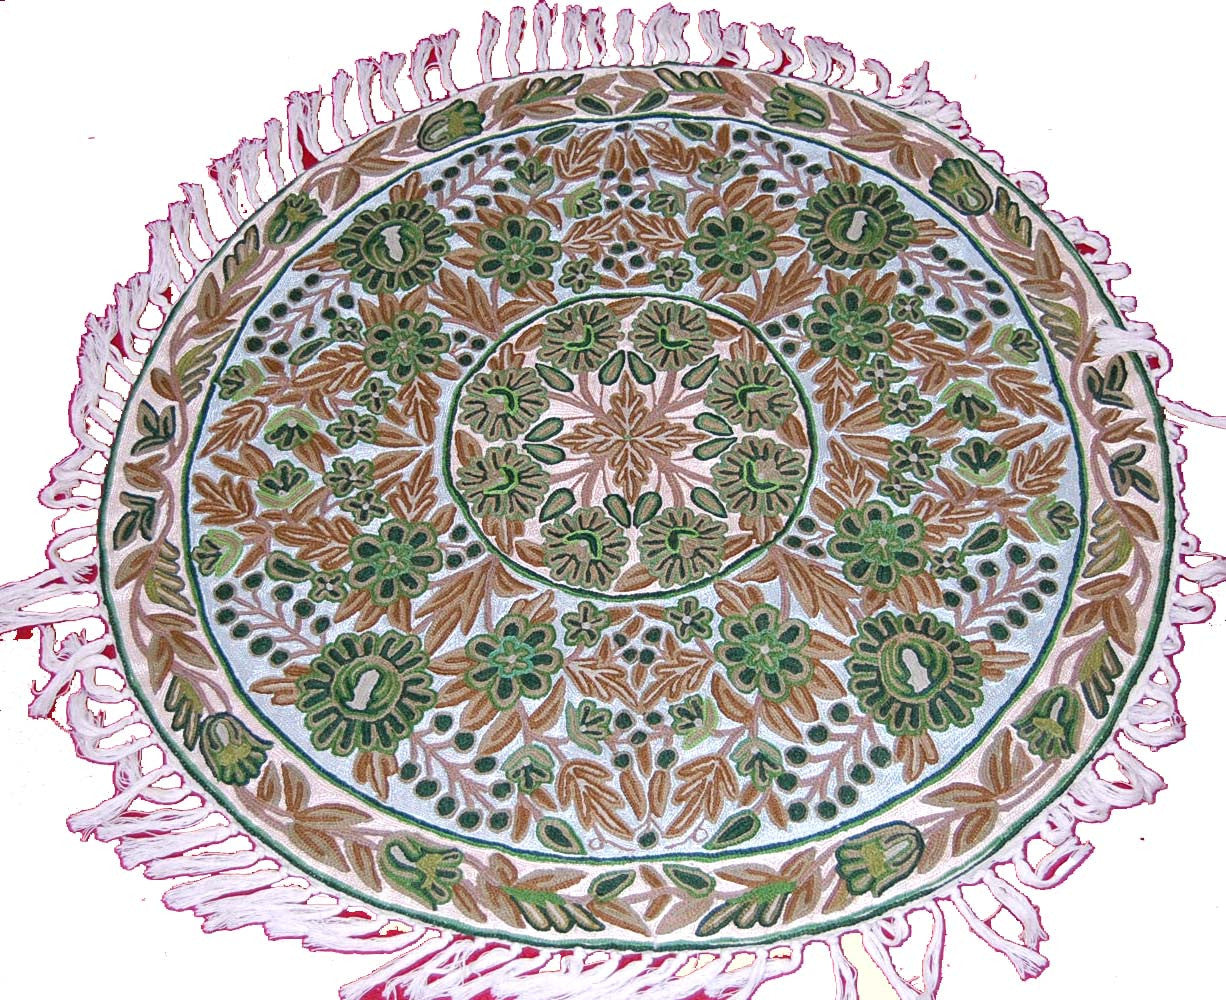 ChainStitch Tapestry Woolen Area Rug,  Multicolor Embroidery 3 feet Round #CWR9201